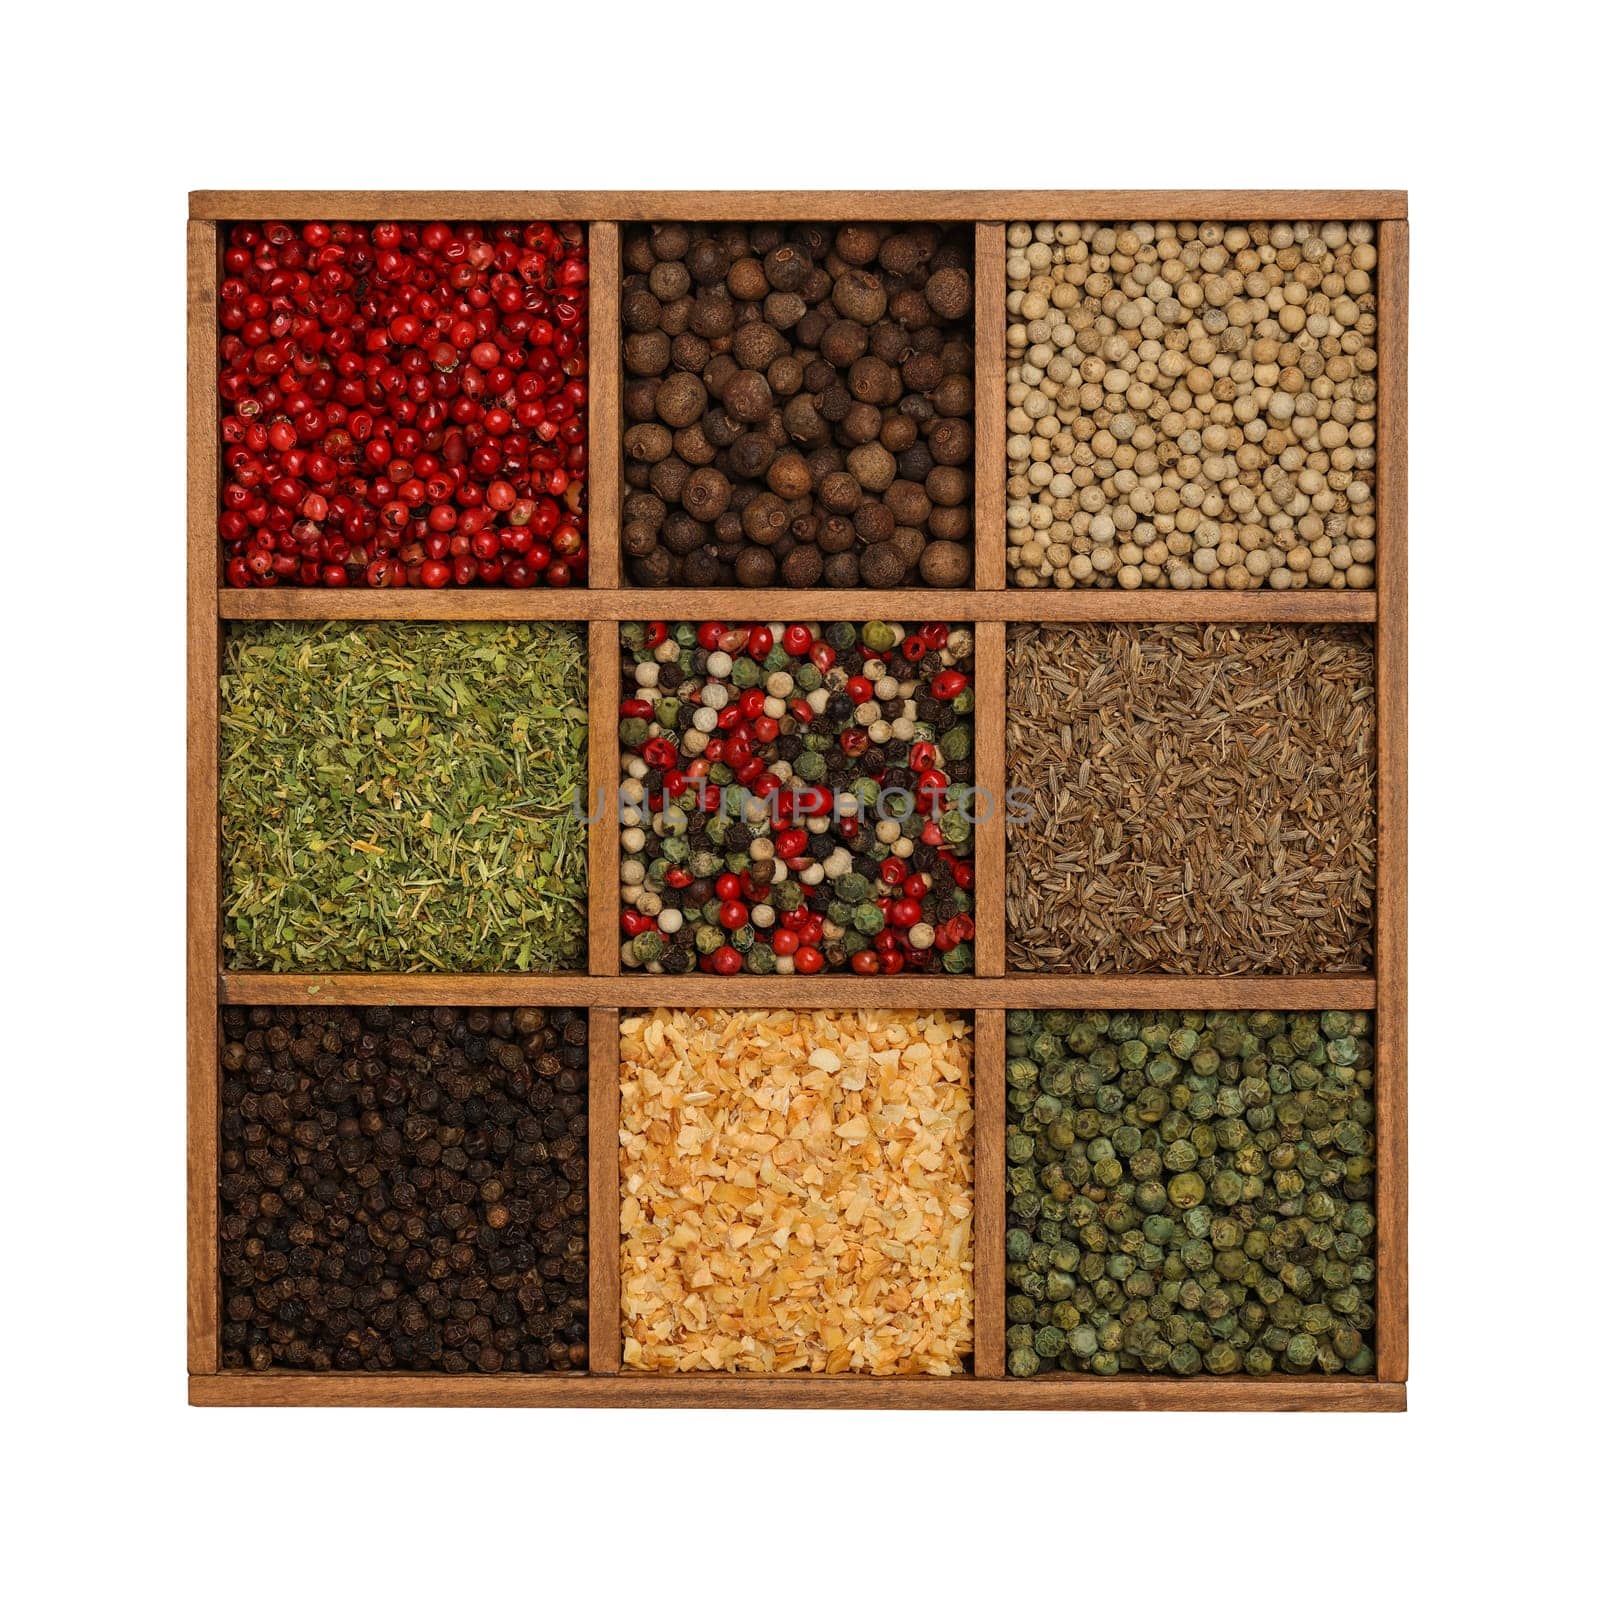 Assorted fresh colorful spices and condiments in a wooden organizer box, isolated on white background, elevated top view, directly above